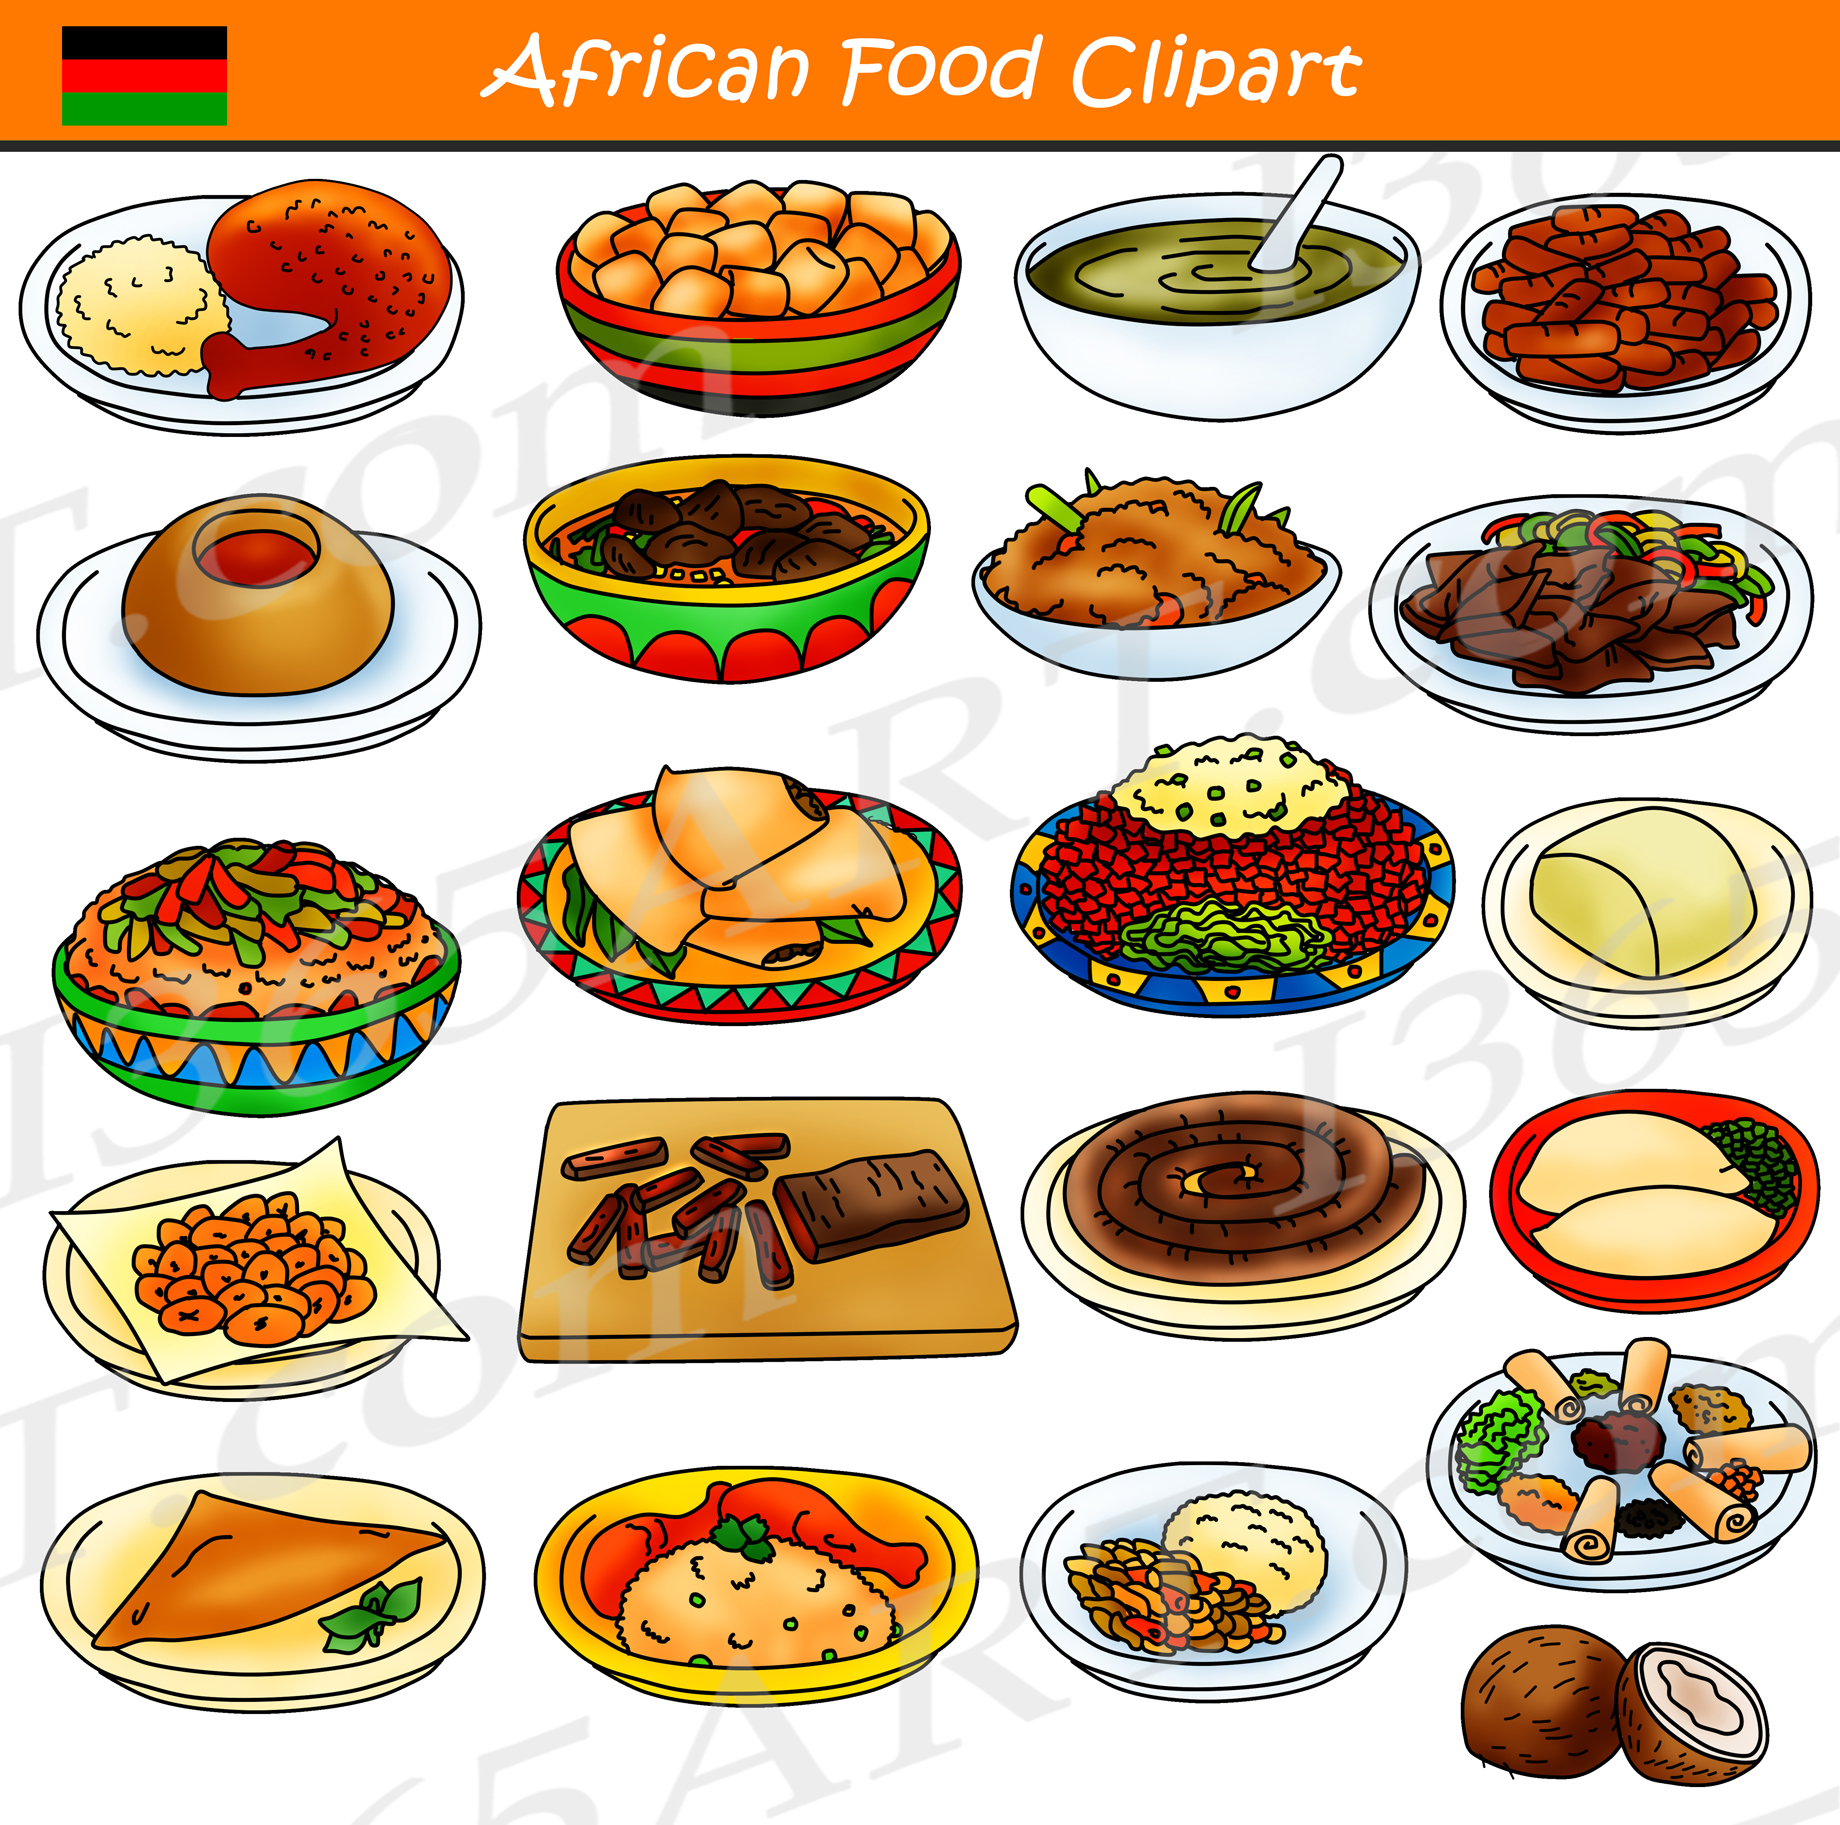 African food clipart.